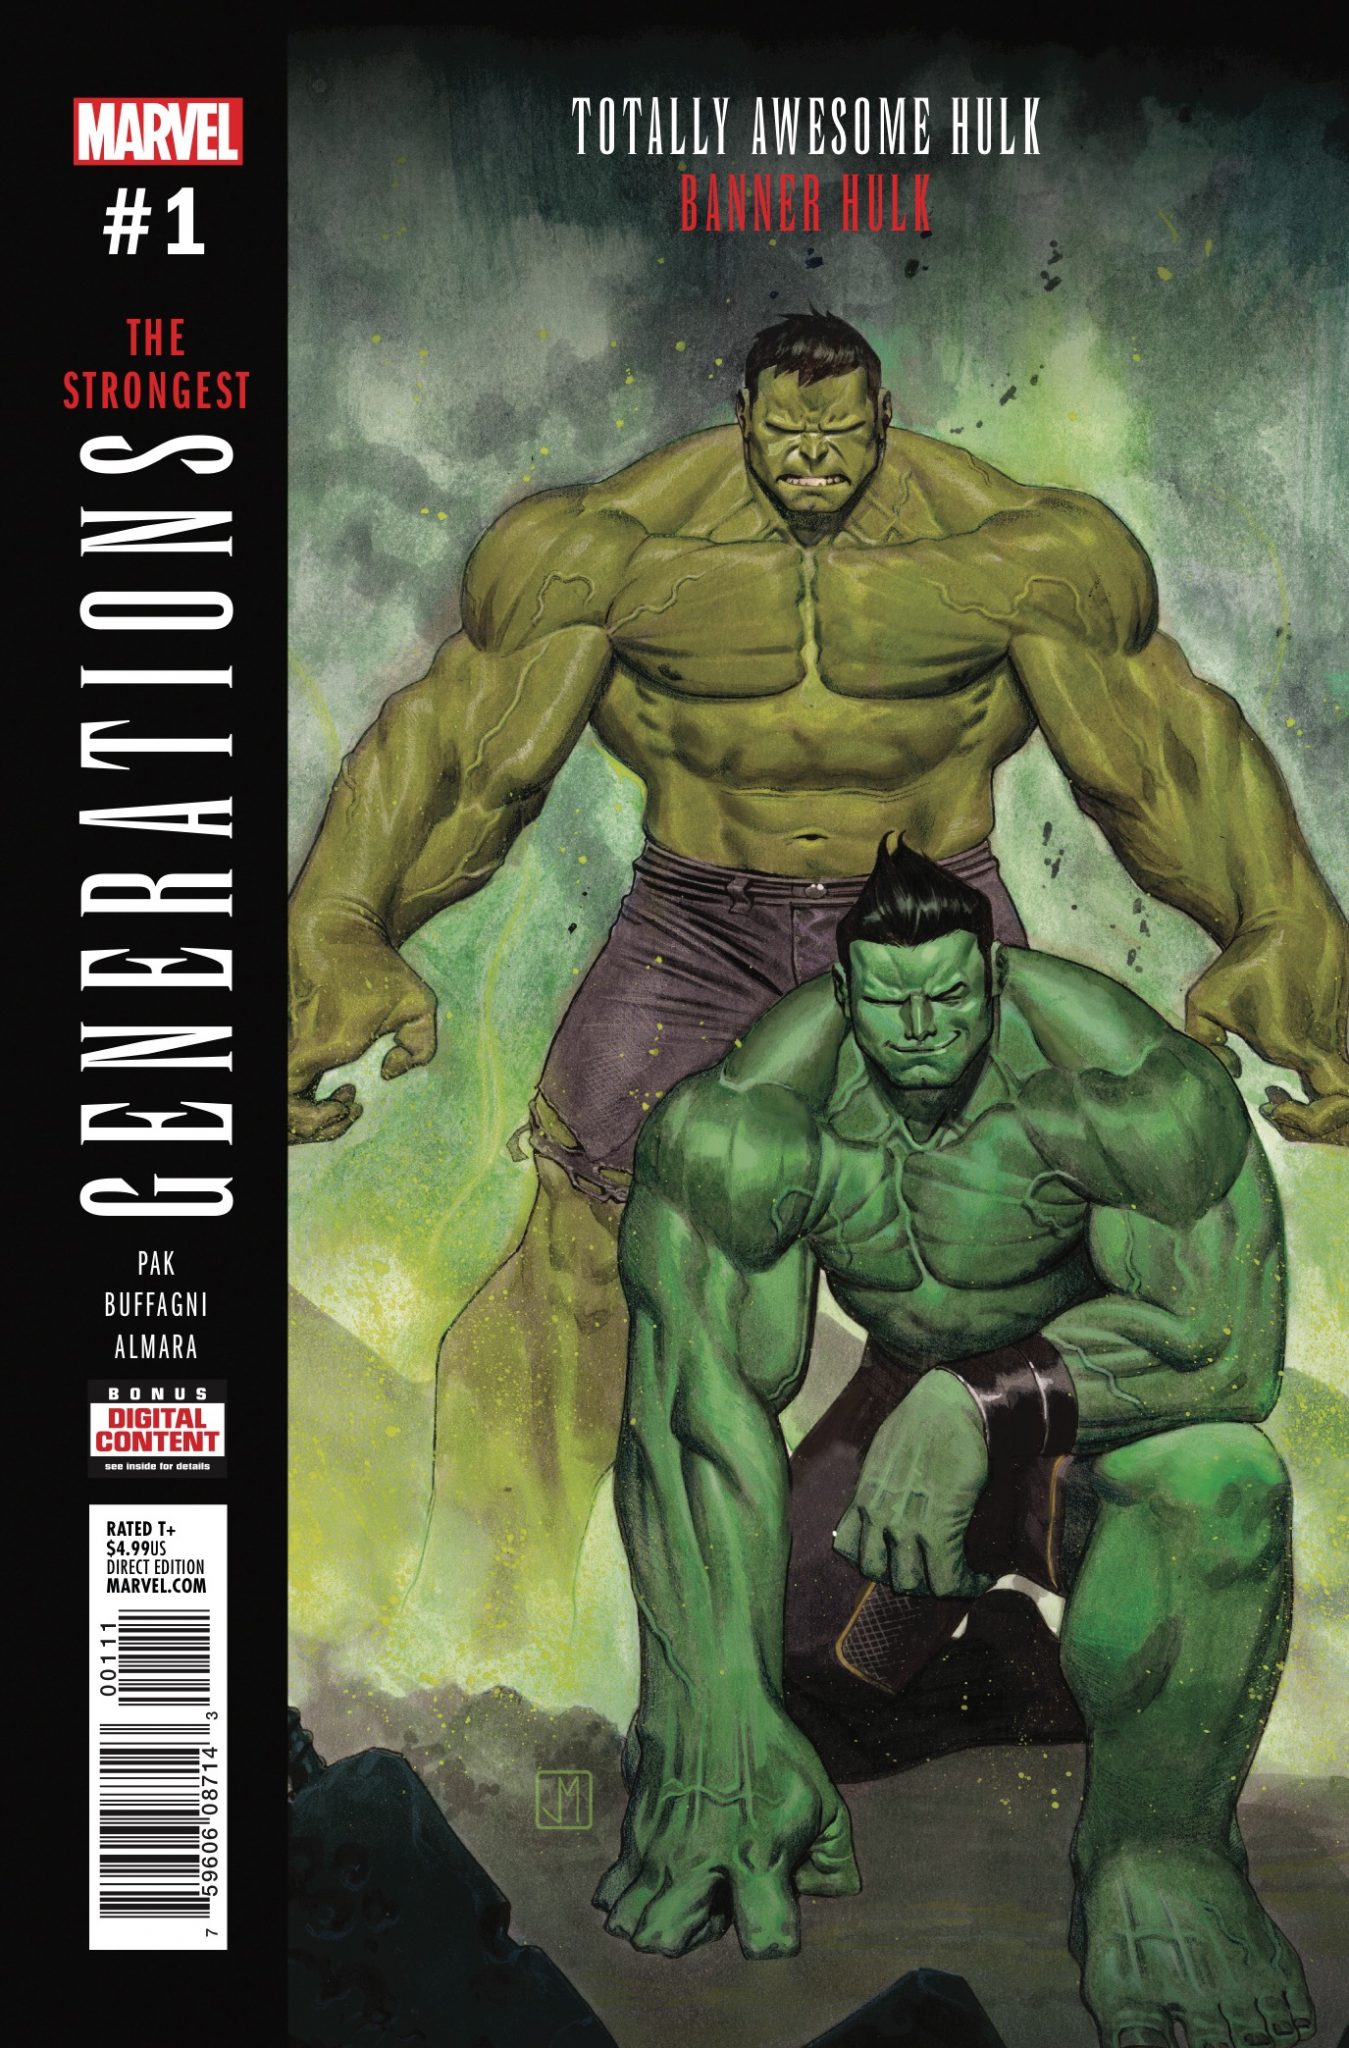 Generations: Banner Hulk and The Totally Awesome Hulk #1 Review